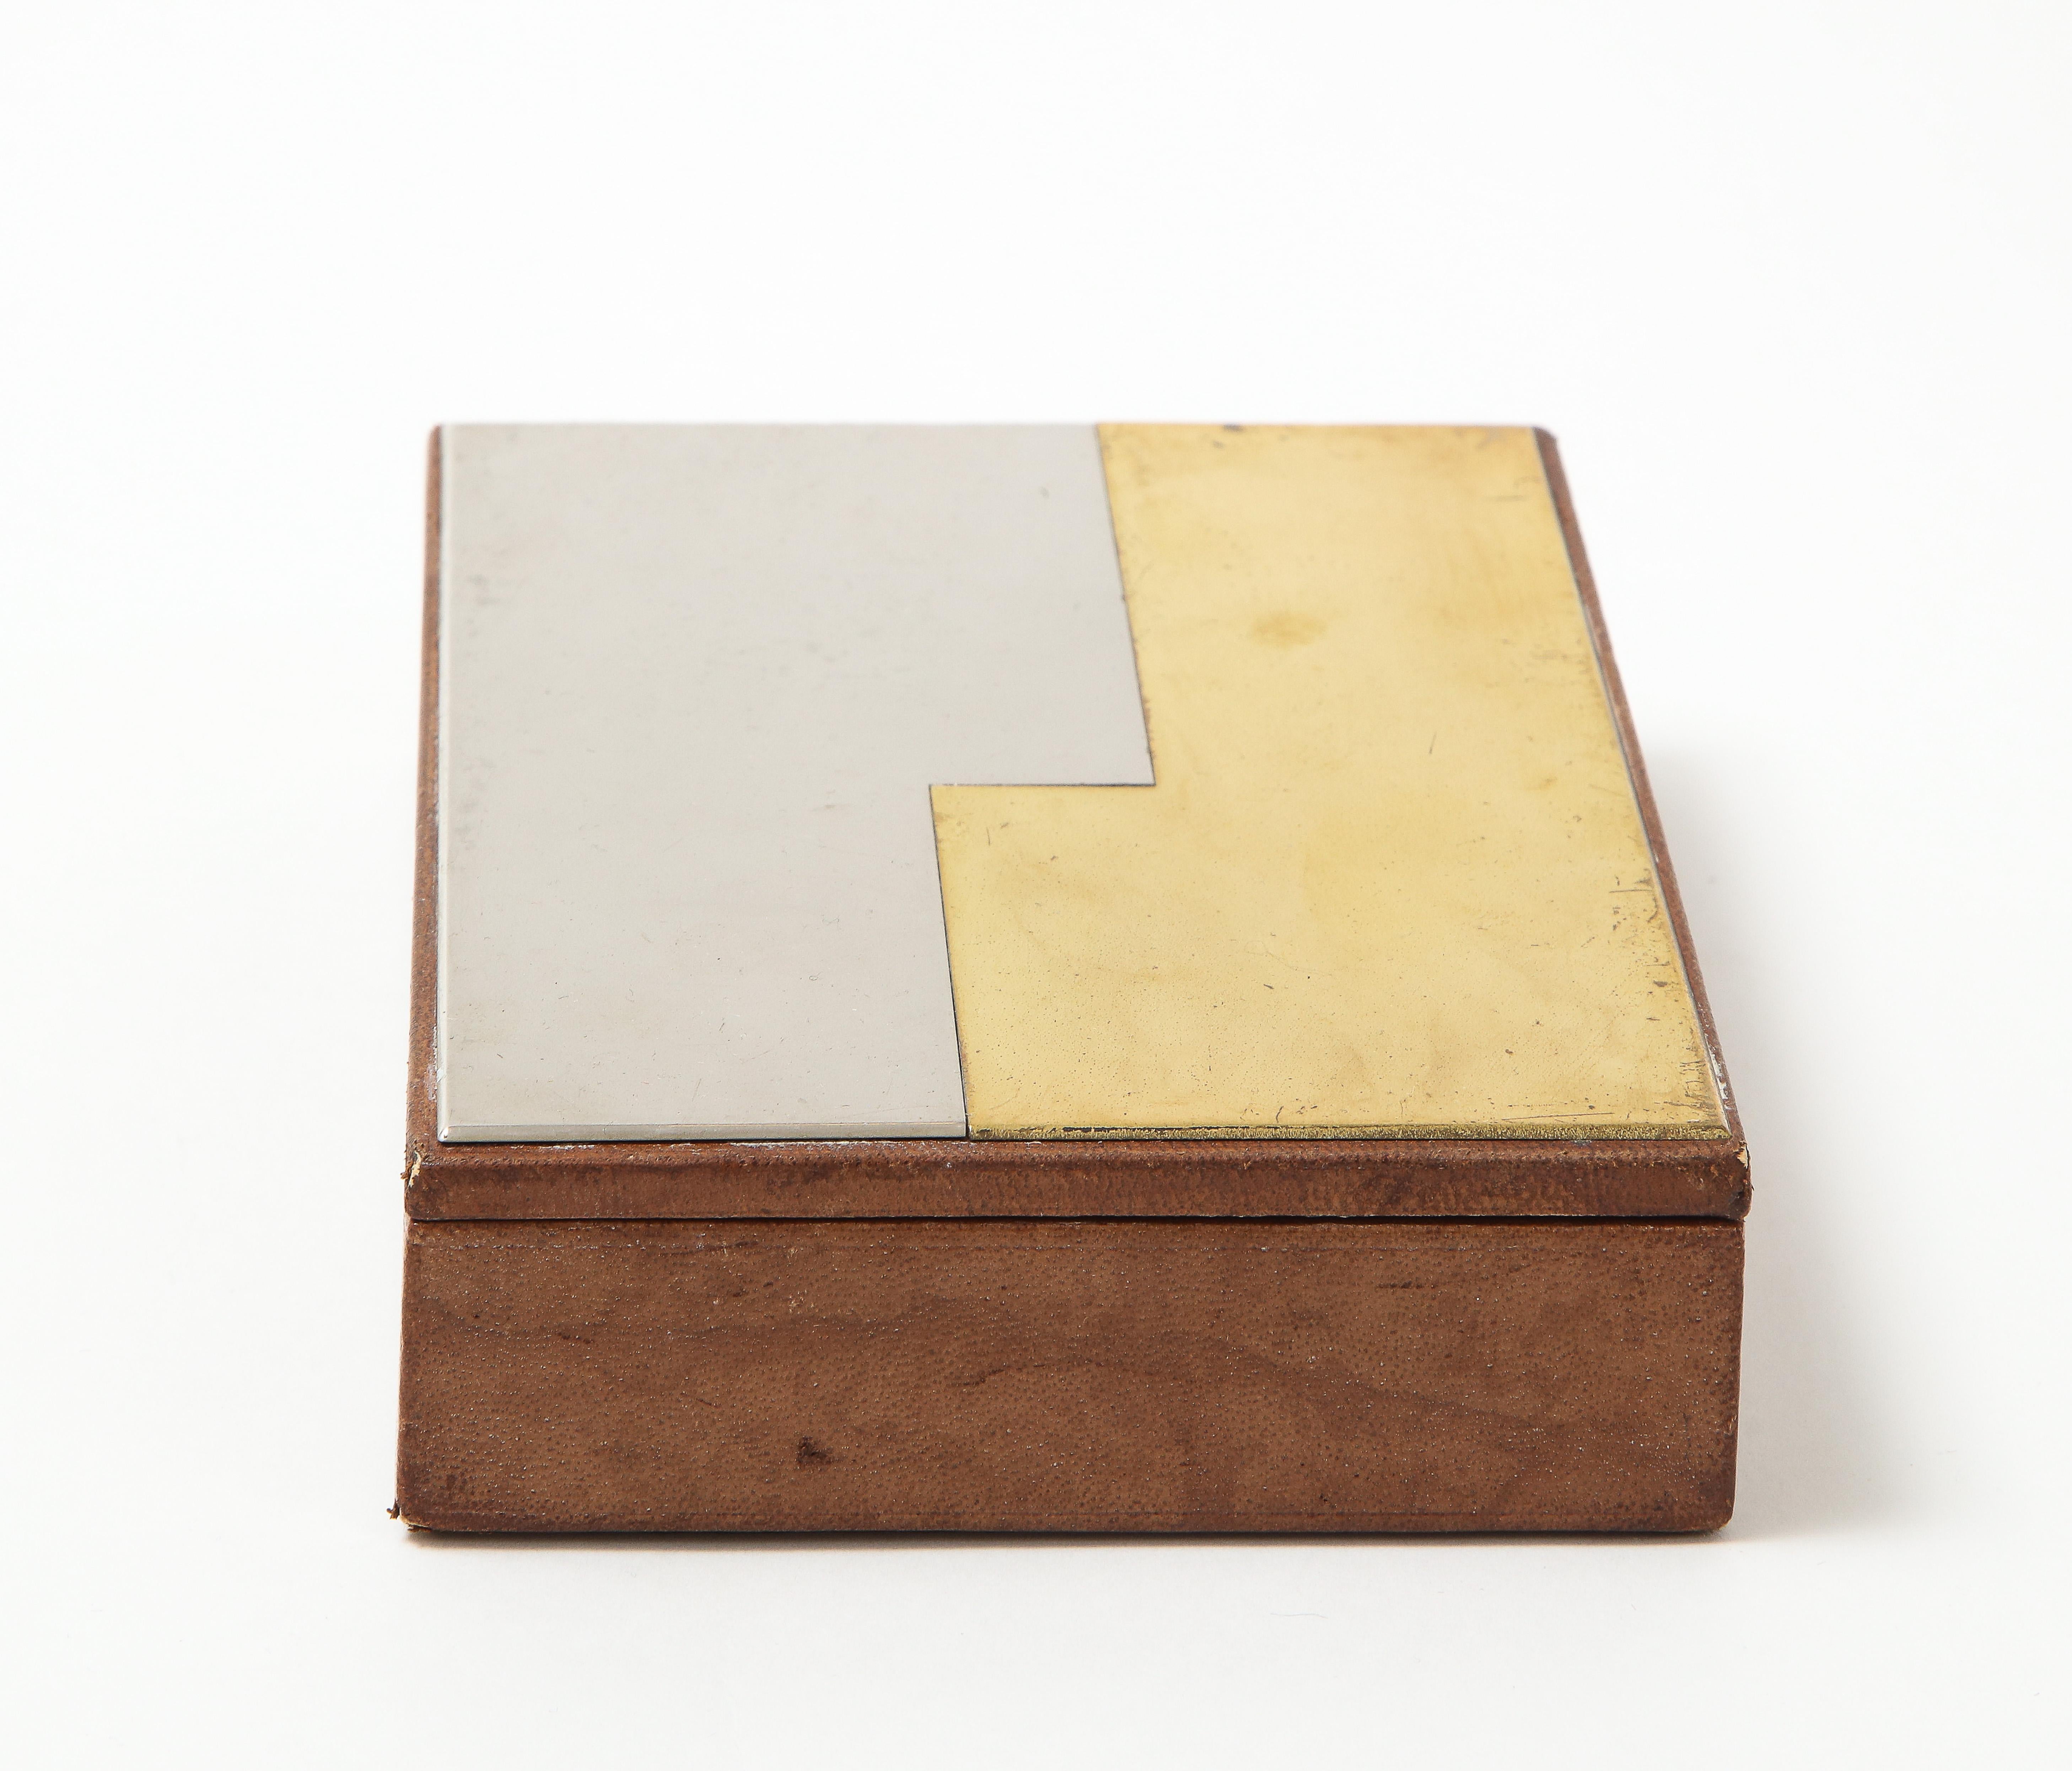 Elegant Brass Stainless Steel and Leather Box, France, 1970's For Sale 2